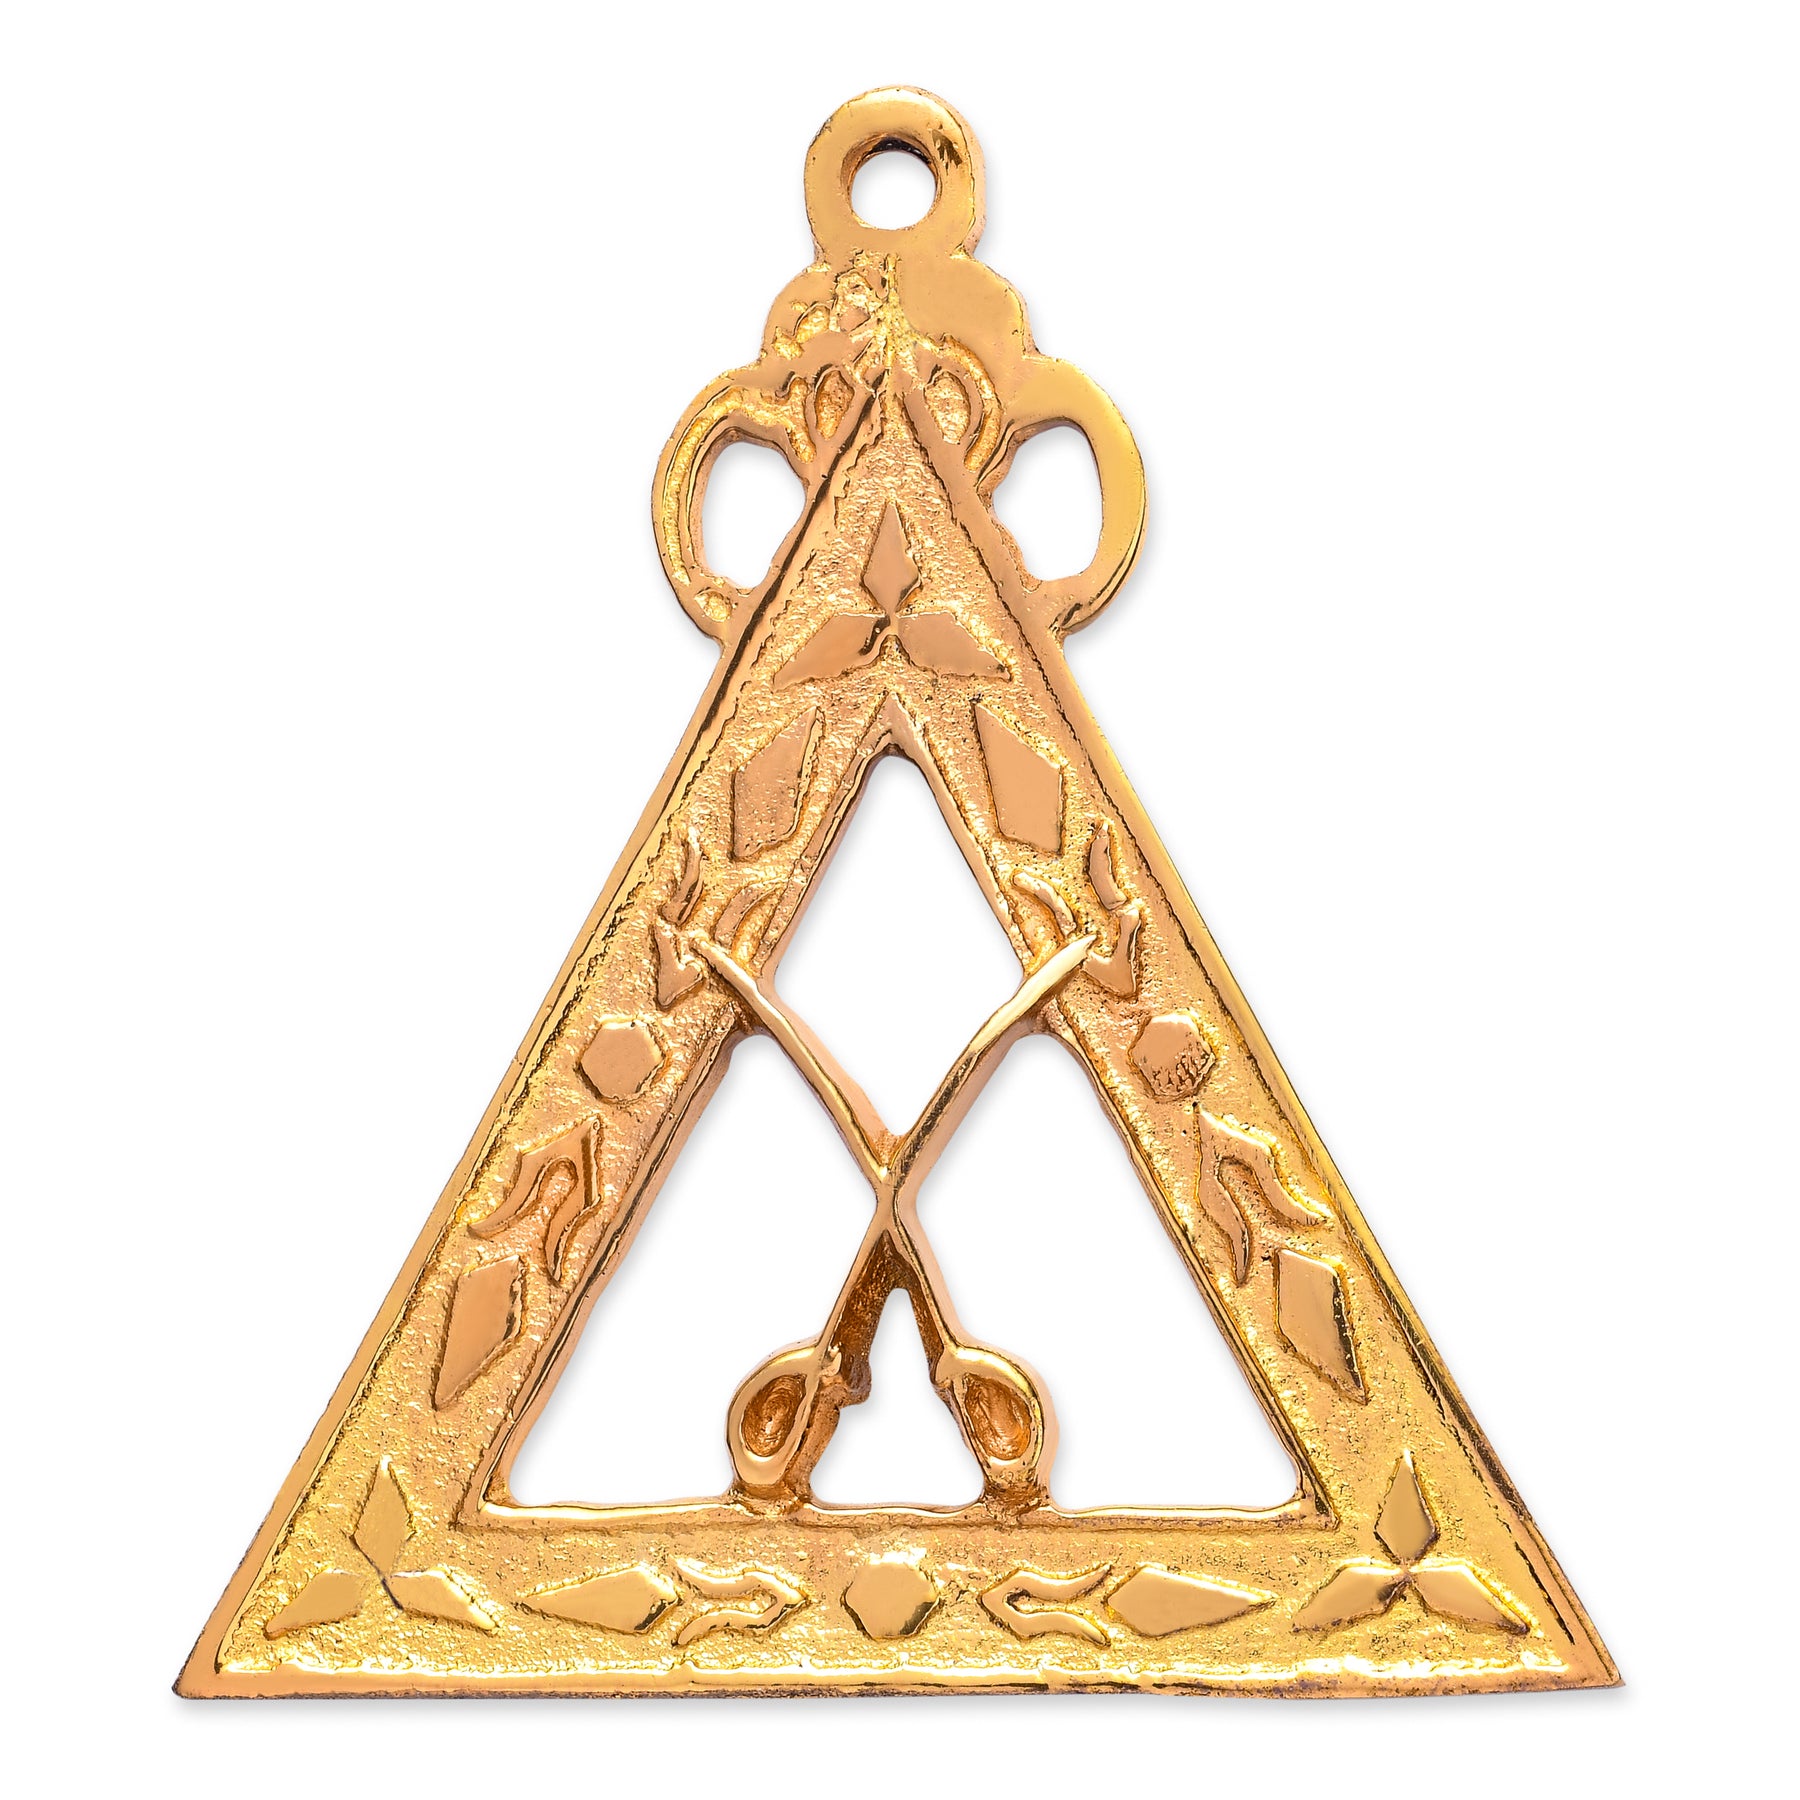 Captain Royal Arch Chapter Officer Collar Jewel - Gold Plated - Bricks Masons